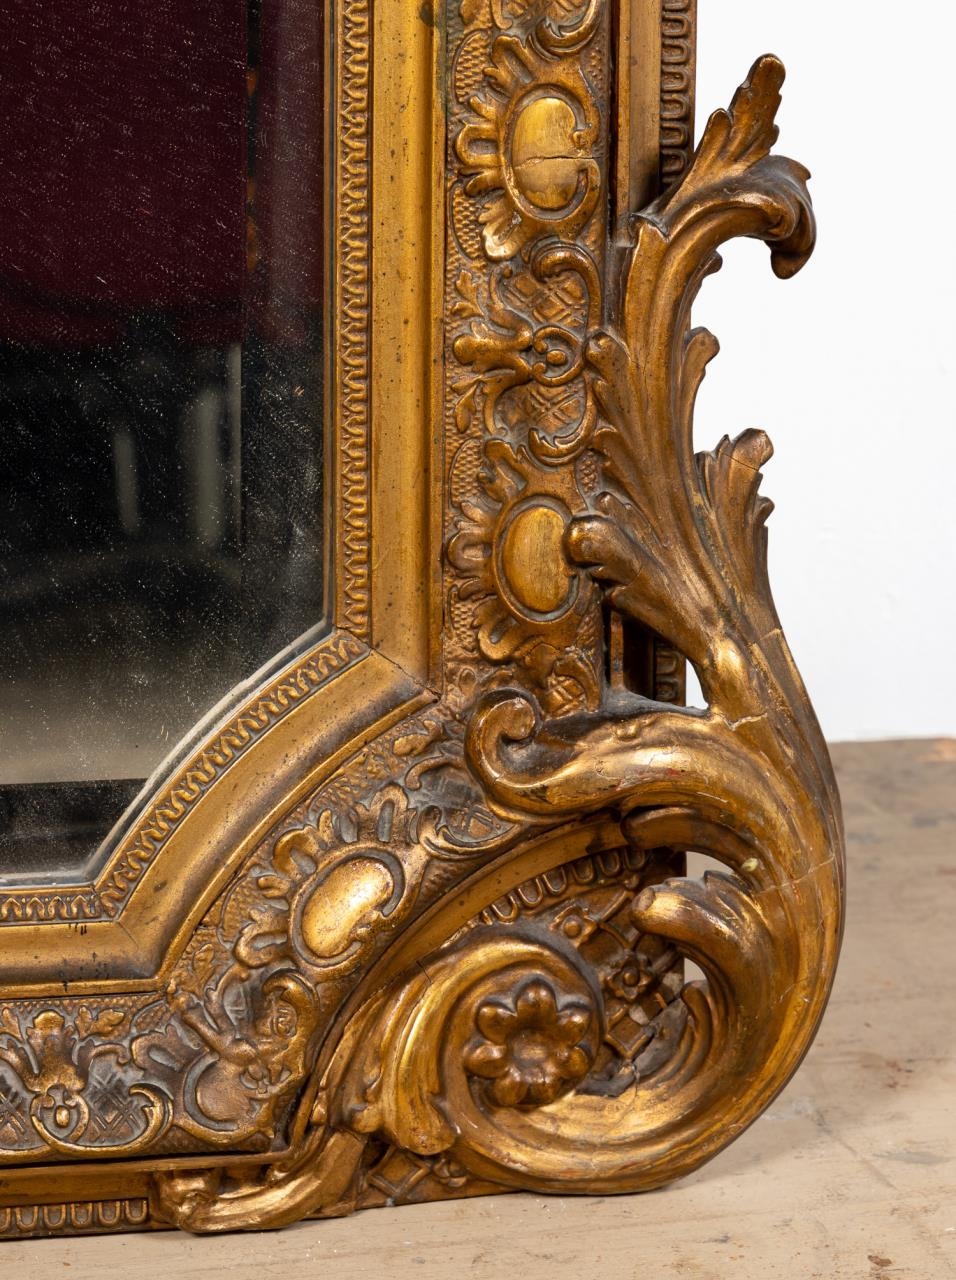 Sold at Auction: FRENCH LOUIS PHILIPPE PERIOD GILTWOOD WALL MIRROR